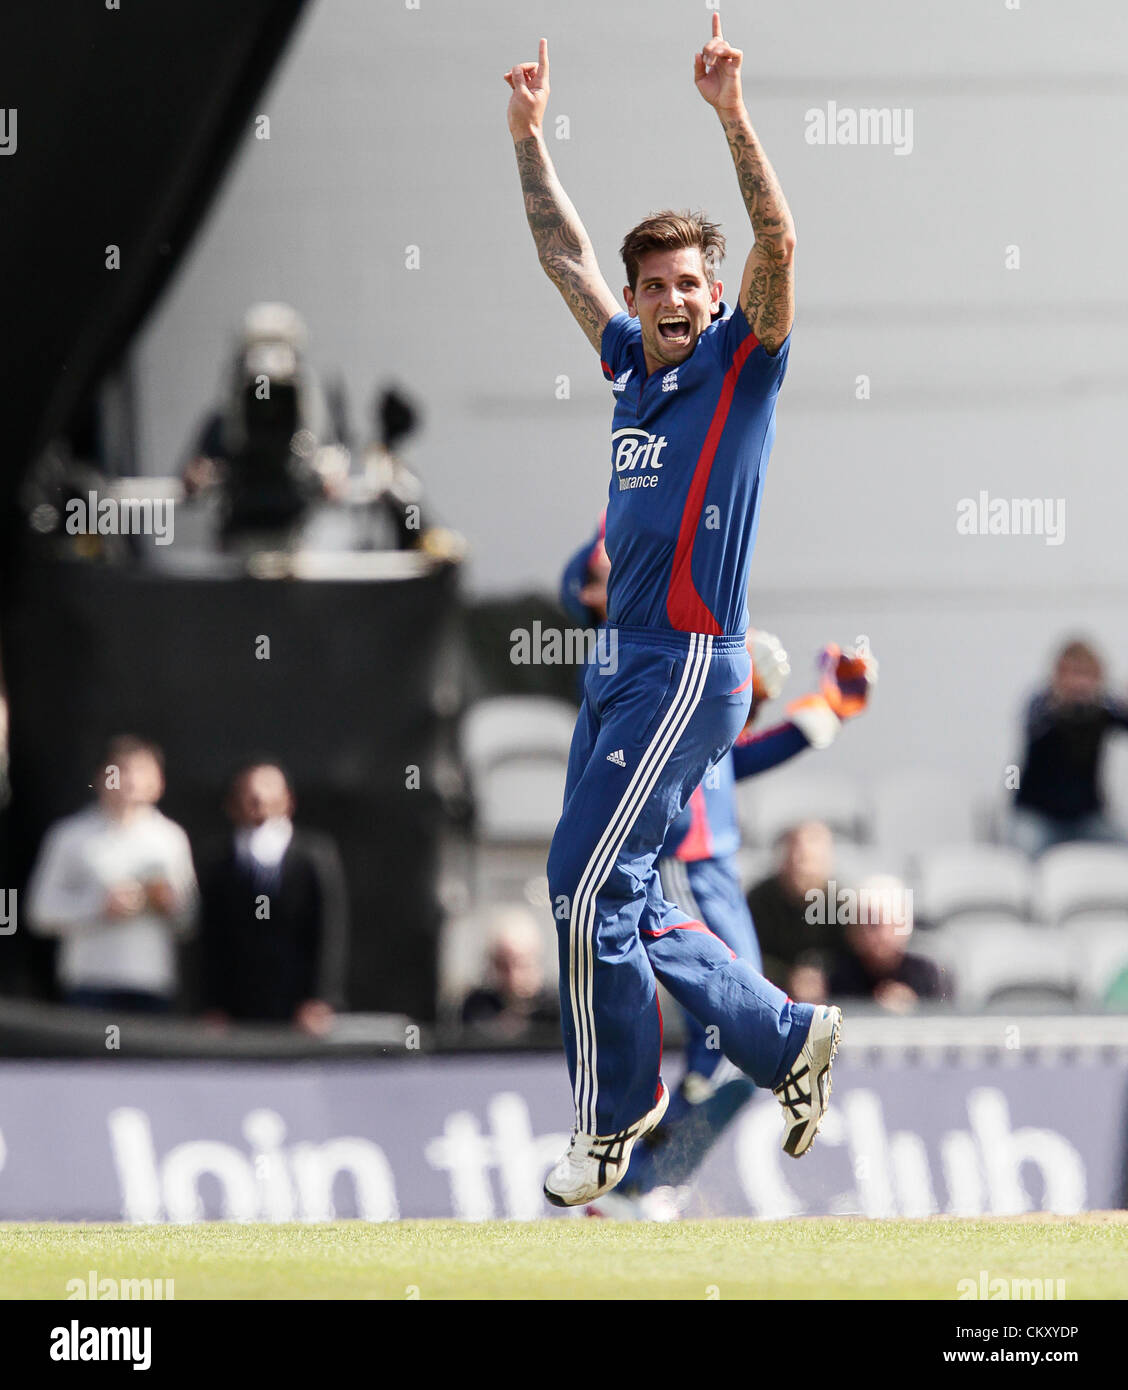 31-08-2012 London England Jade Dernbach claims his 2nd wicket having Parnell caught caught behind during the England v South Africa: 3rd Natwest ODI at The Kia Oval Cricket Ground Kennington London England. Stock Photo